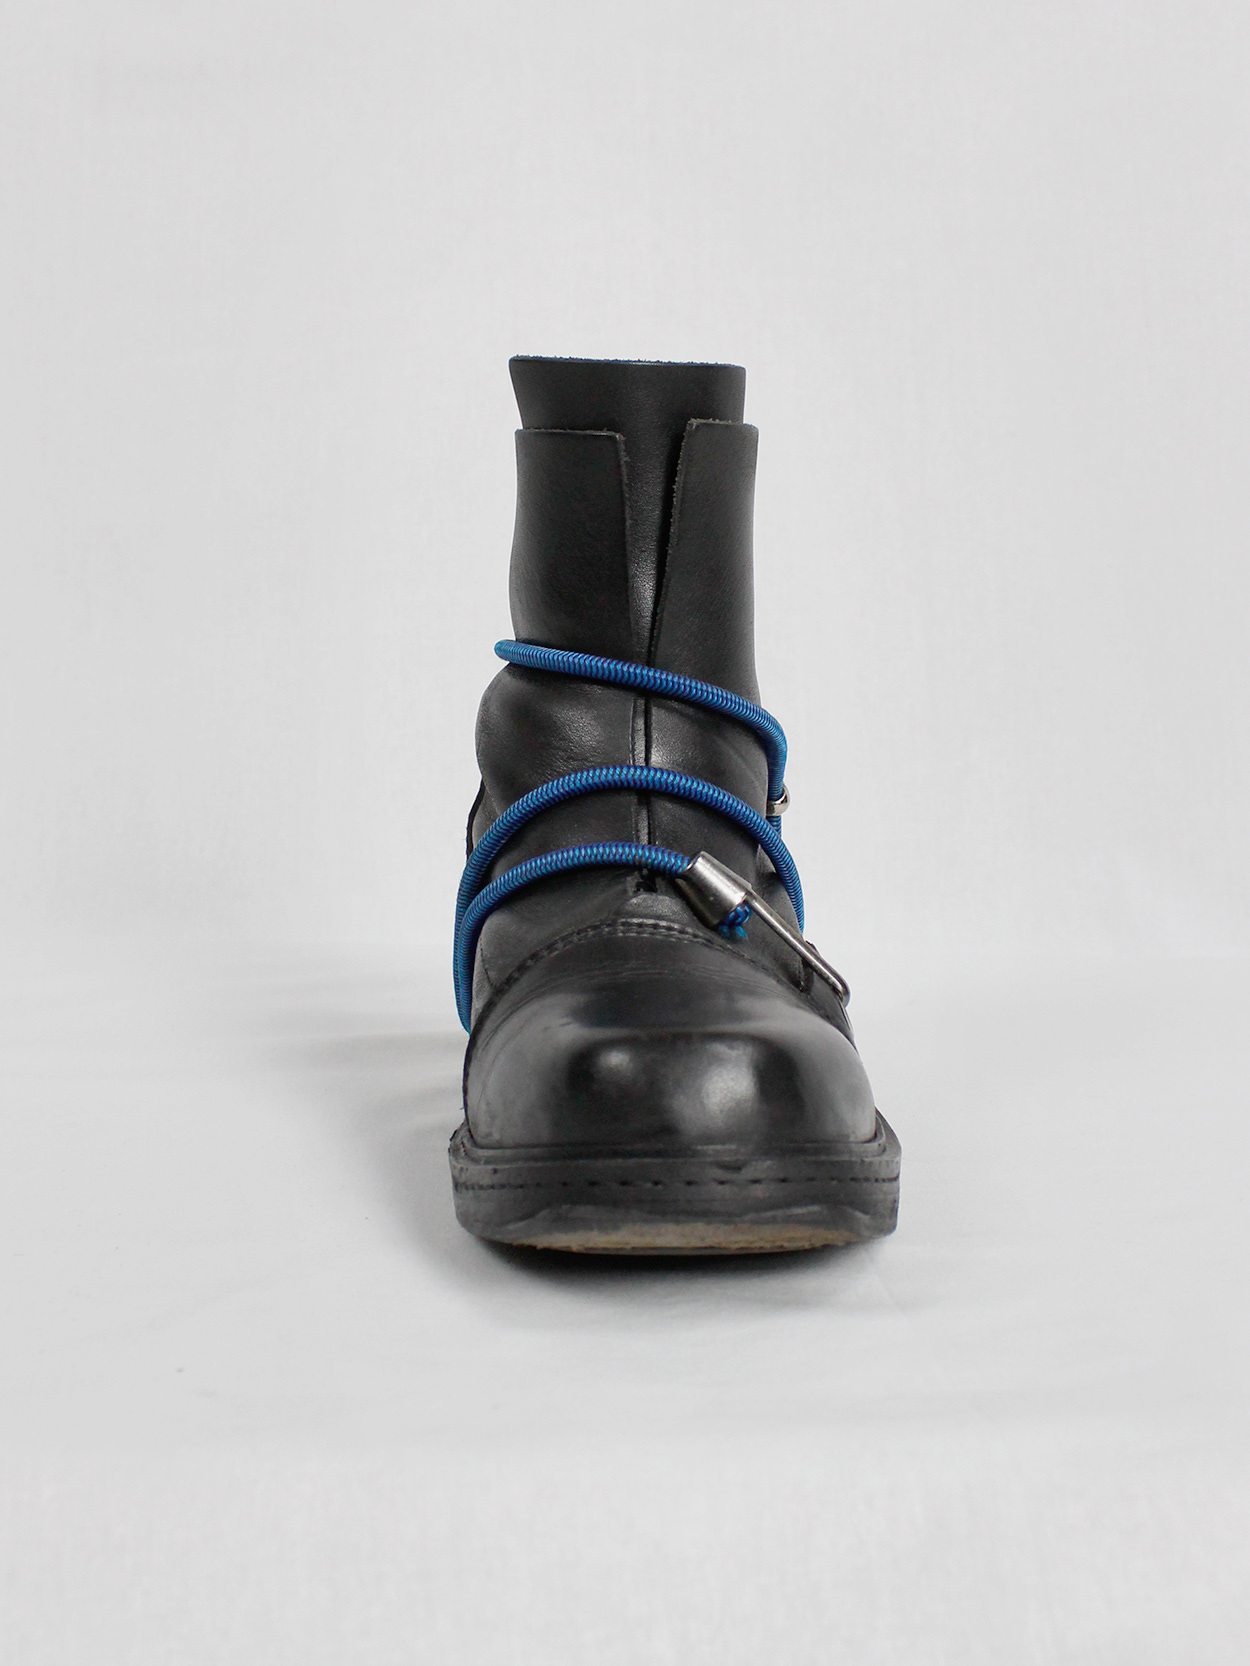 Dirk Bikkembergs black mountaineering boots with metal heel and blue elastic fall 1996 (20)